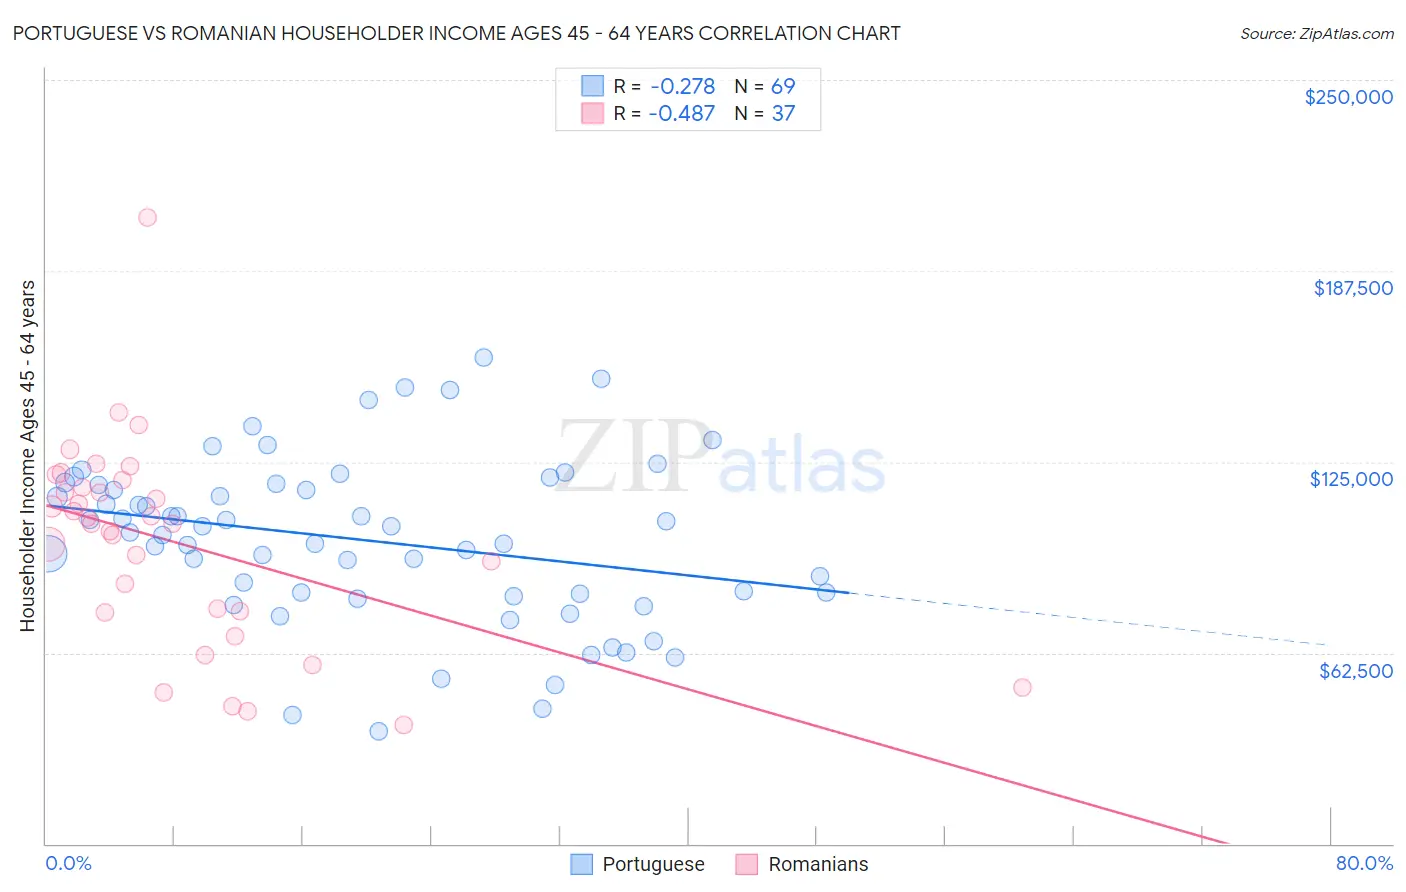 Portuguese vs Romanian Householder Income Ages 45 - 64 years